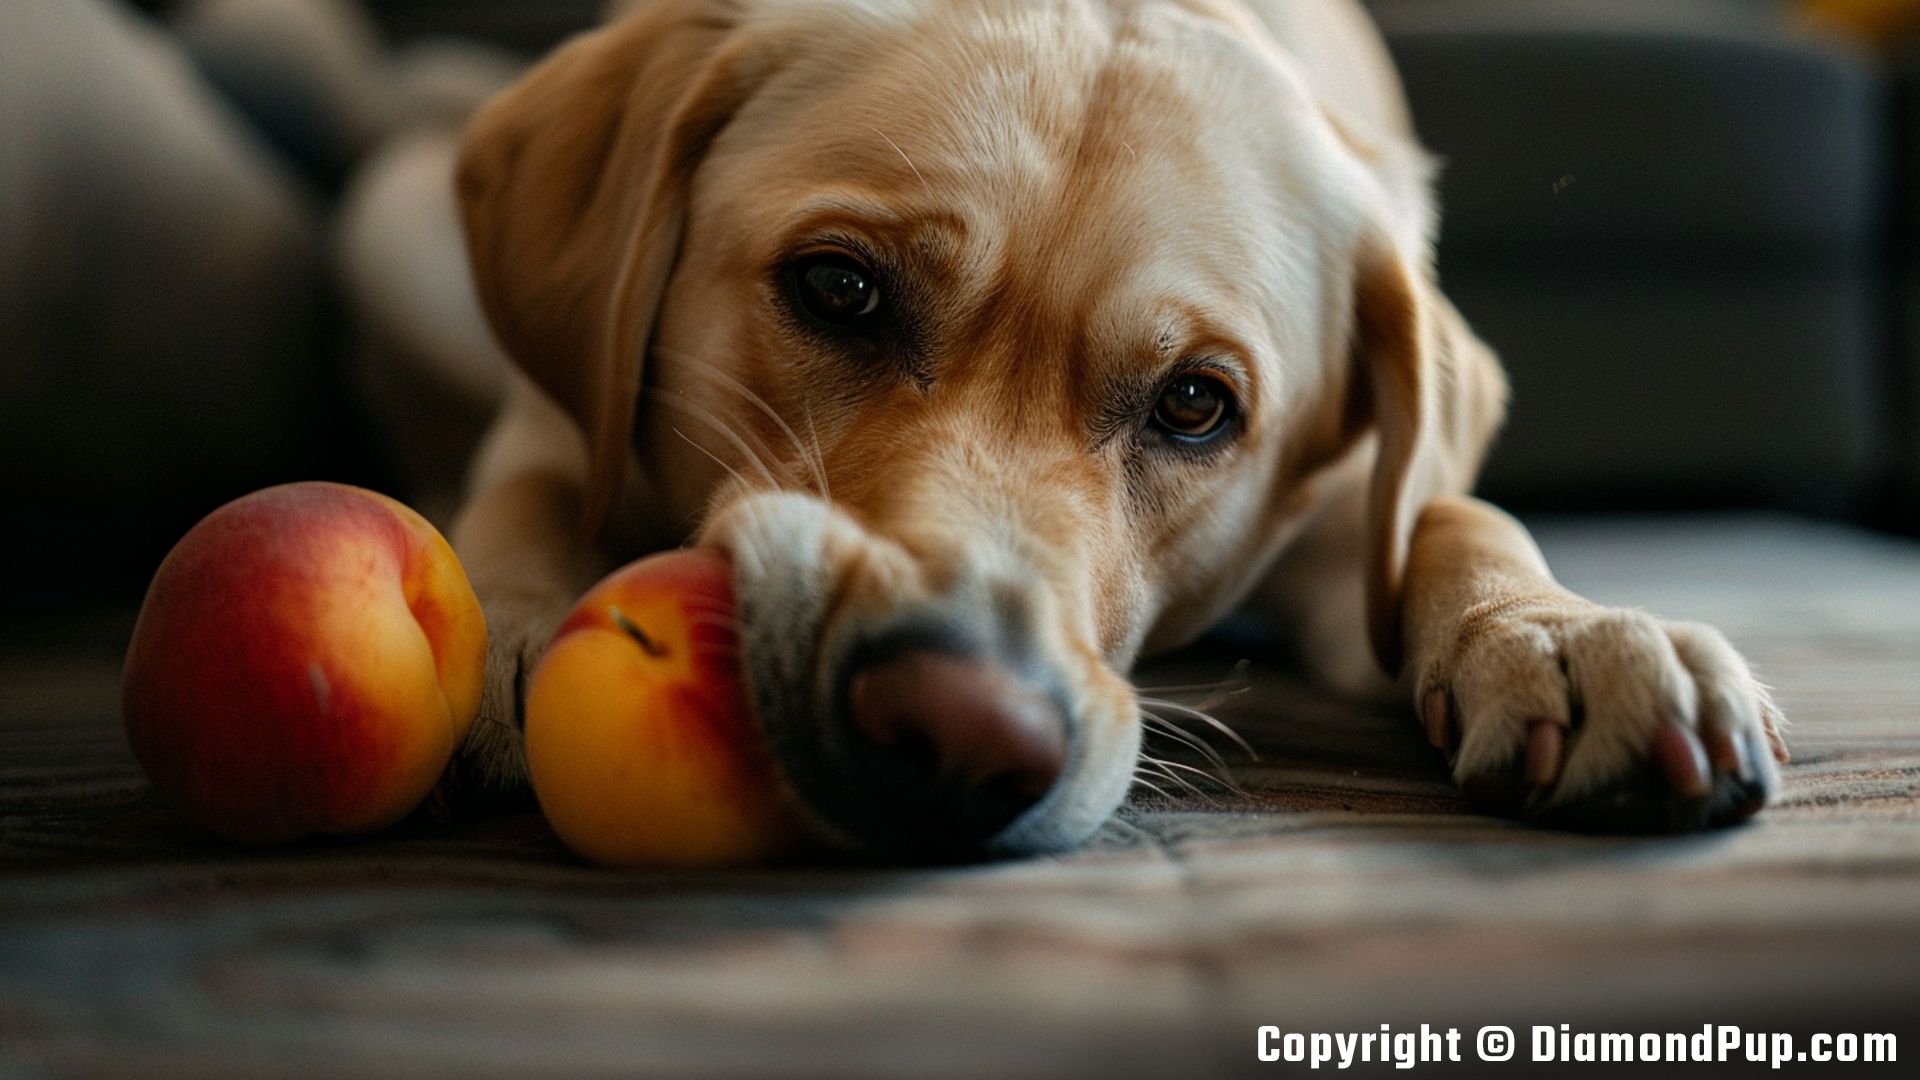 Photo of a Playful Labrador Snacking on Peaches